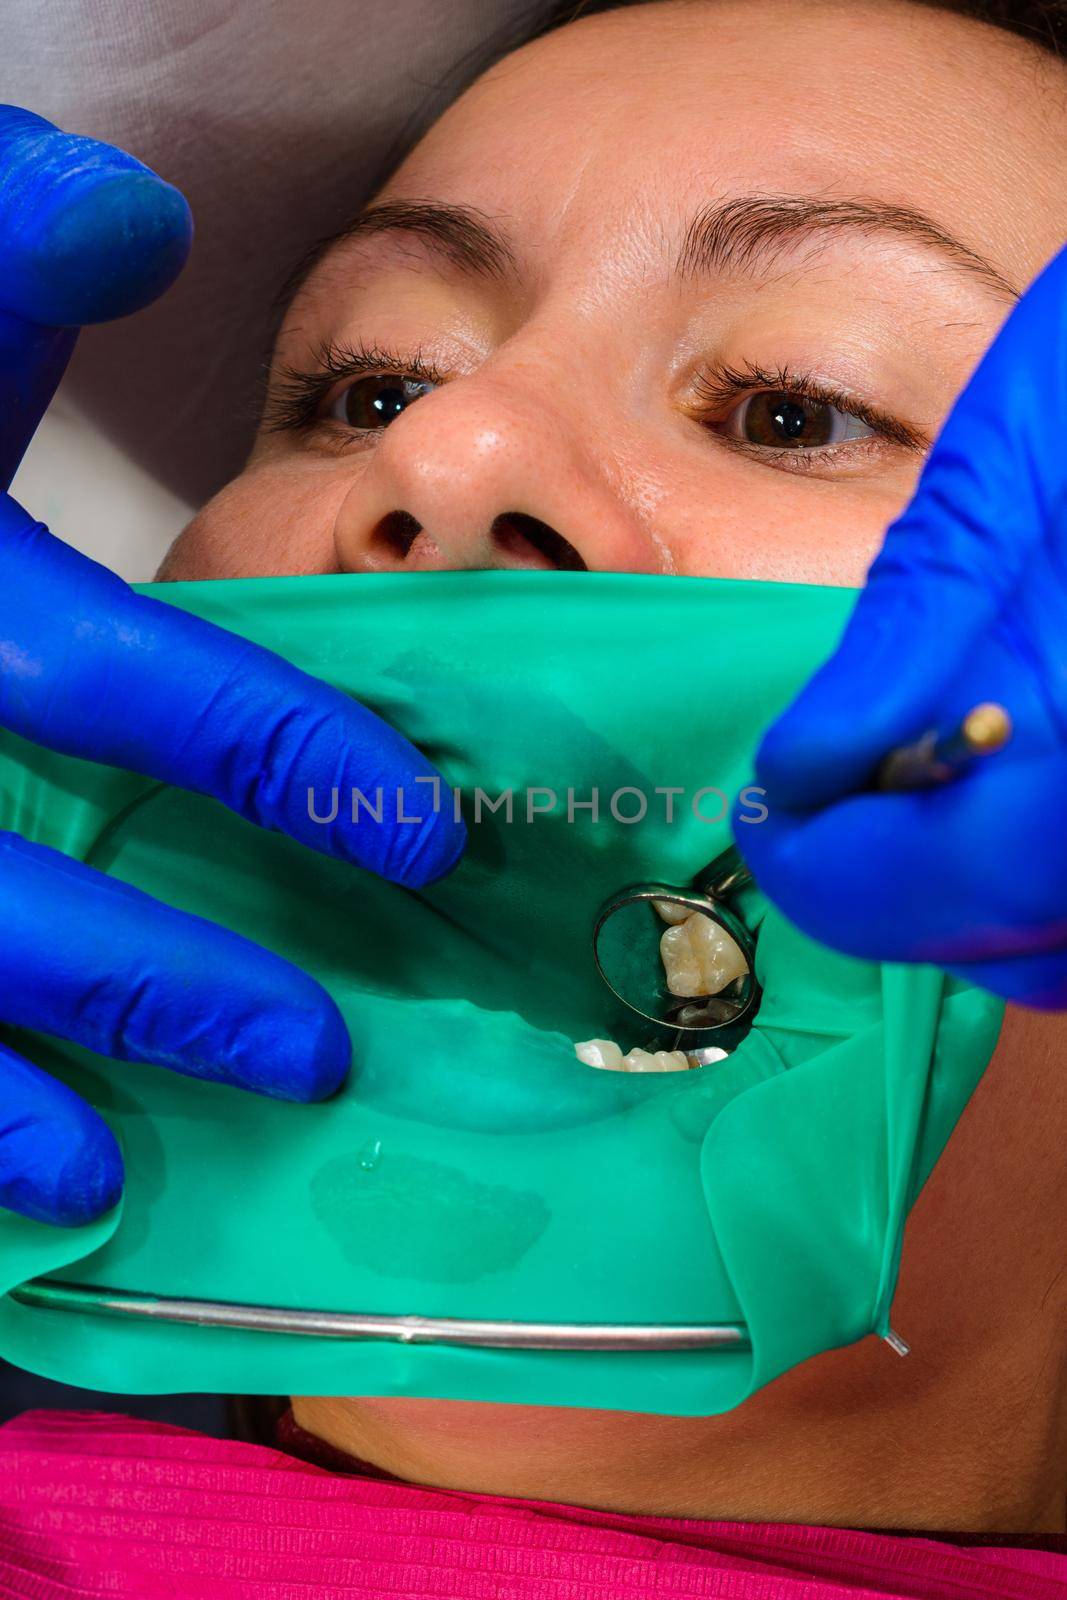 The dentist treats the patient's tooth with a rubber dam, drill, mirror. by Niko_Cingaryuk